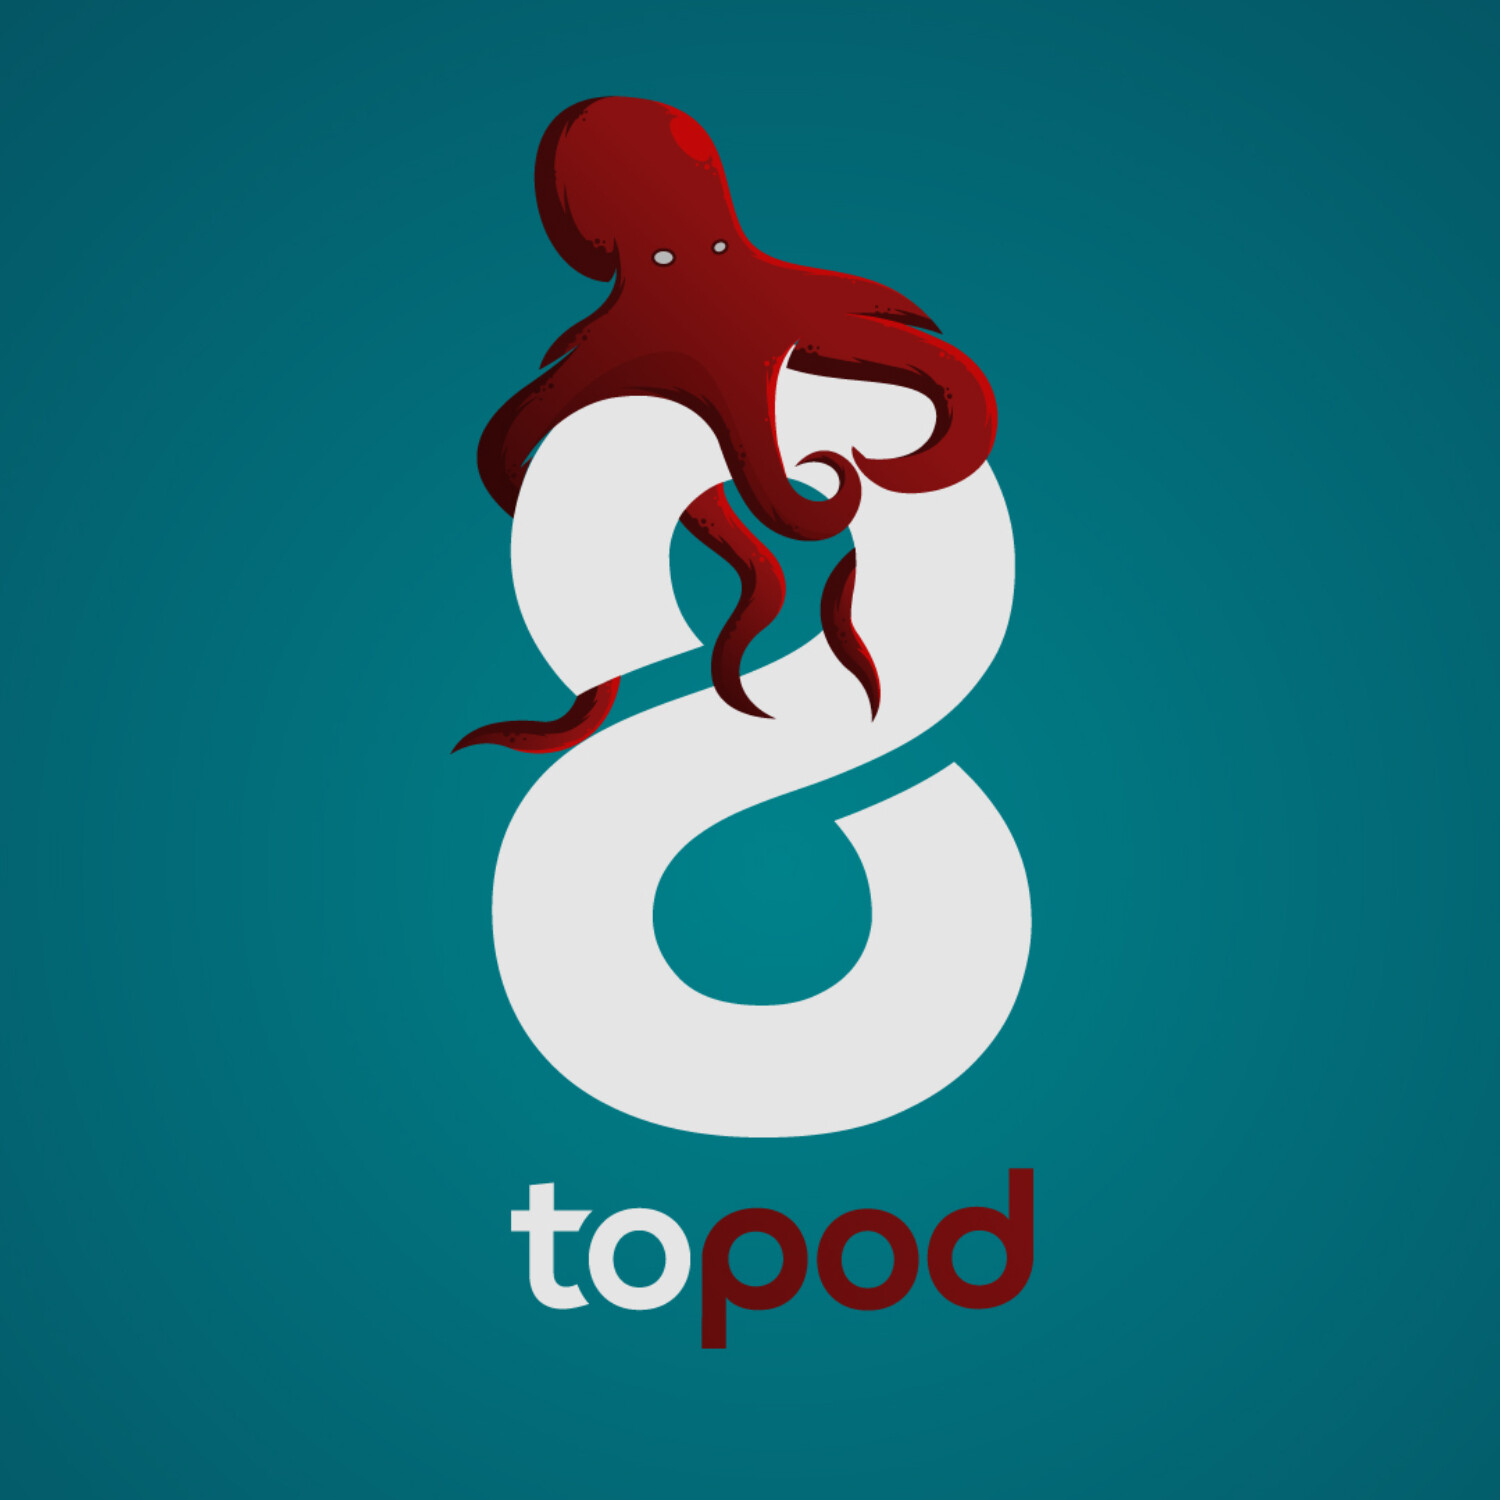 Fintech Podcast: 8topod the 8topuz Financial Technology Podcast Hosted by Anthony Munns